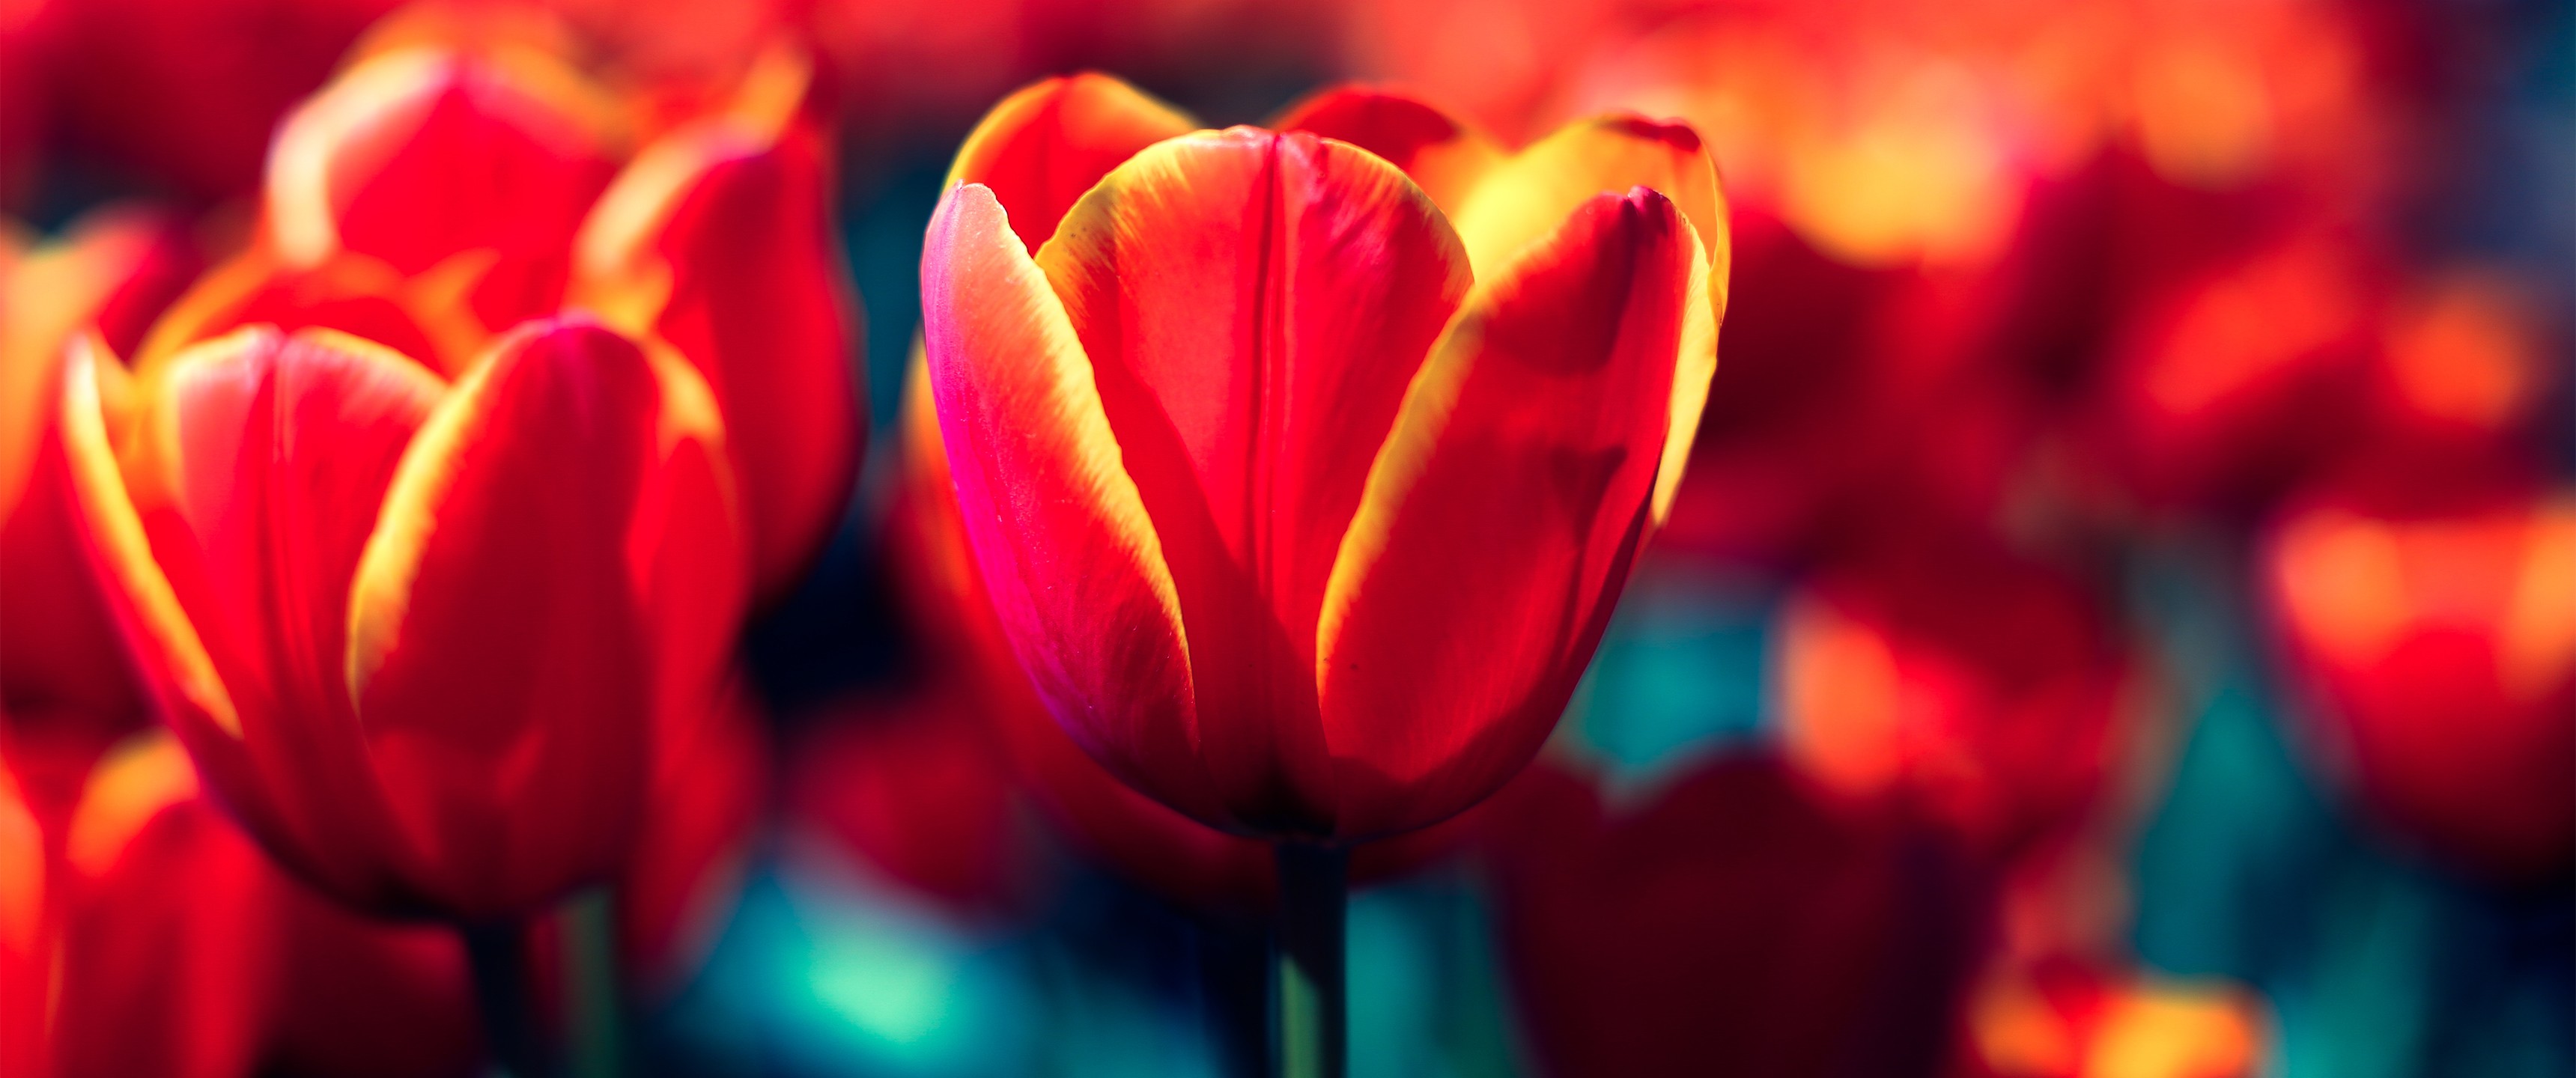 General 3440x1440 tulips red flowers nature plants